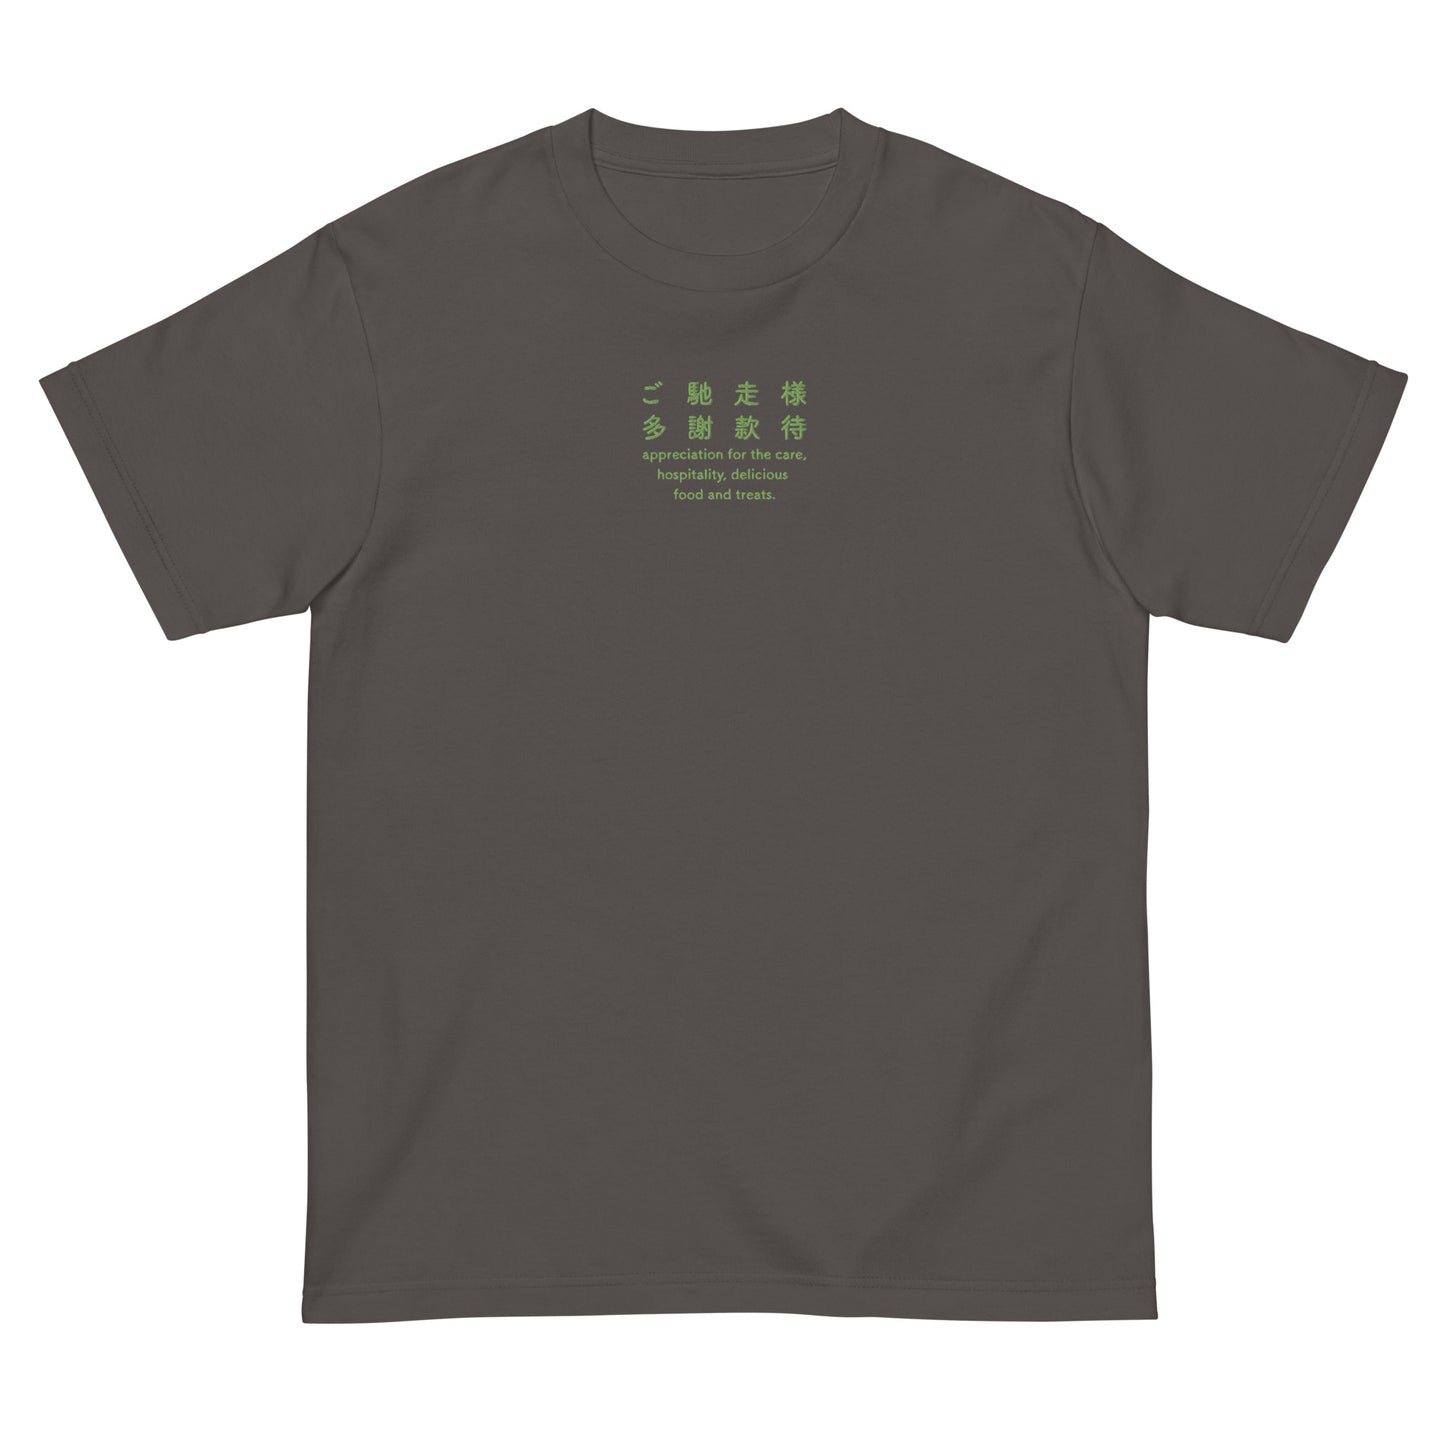 Dark Gray High Quality Tee - Front Design with an Green Embroidery "Gochisosama" in Japanese,Chinese and English